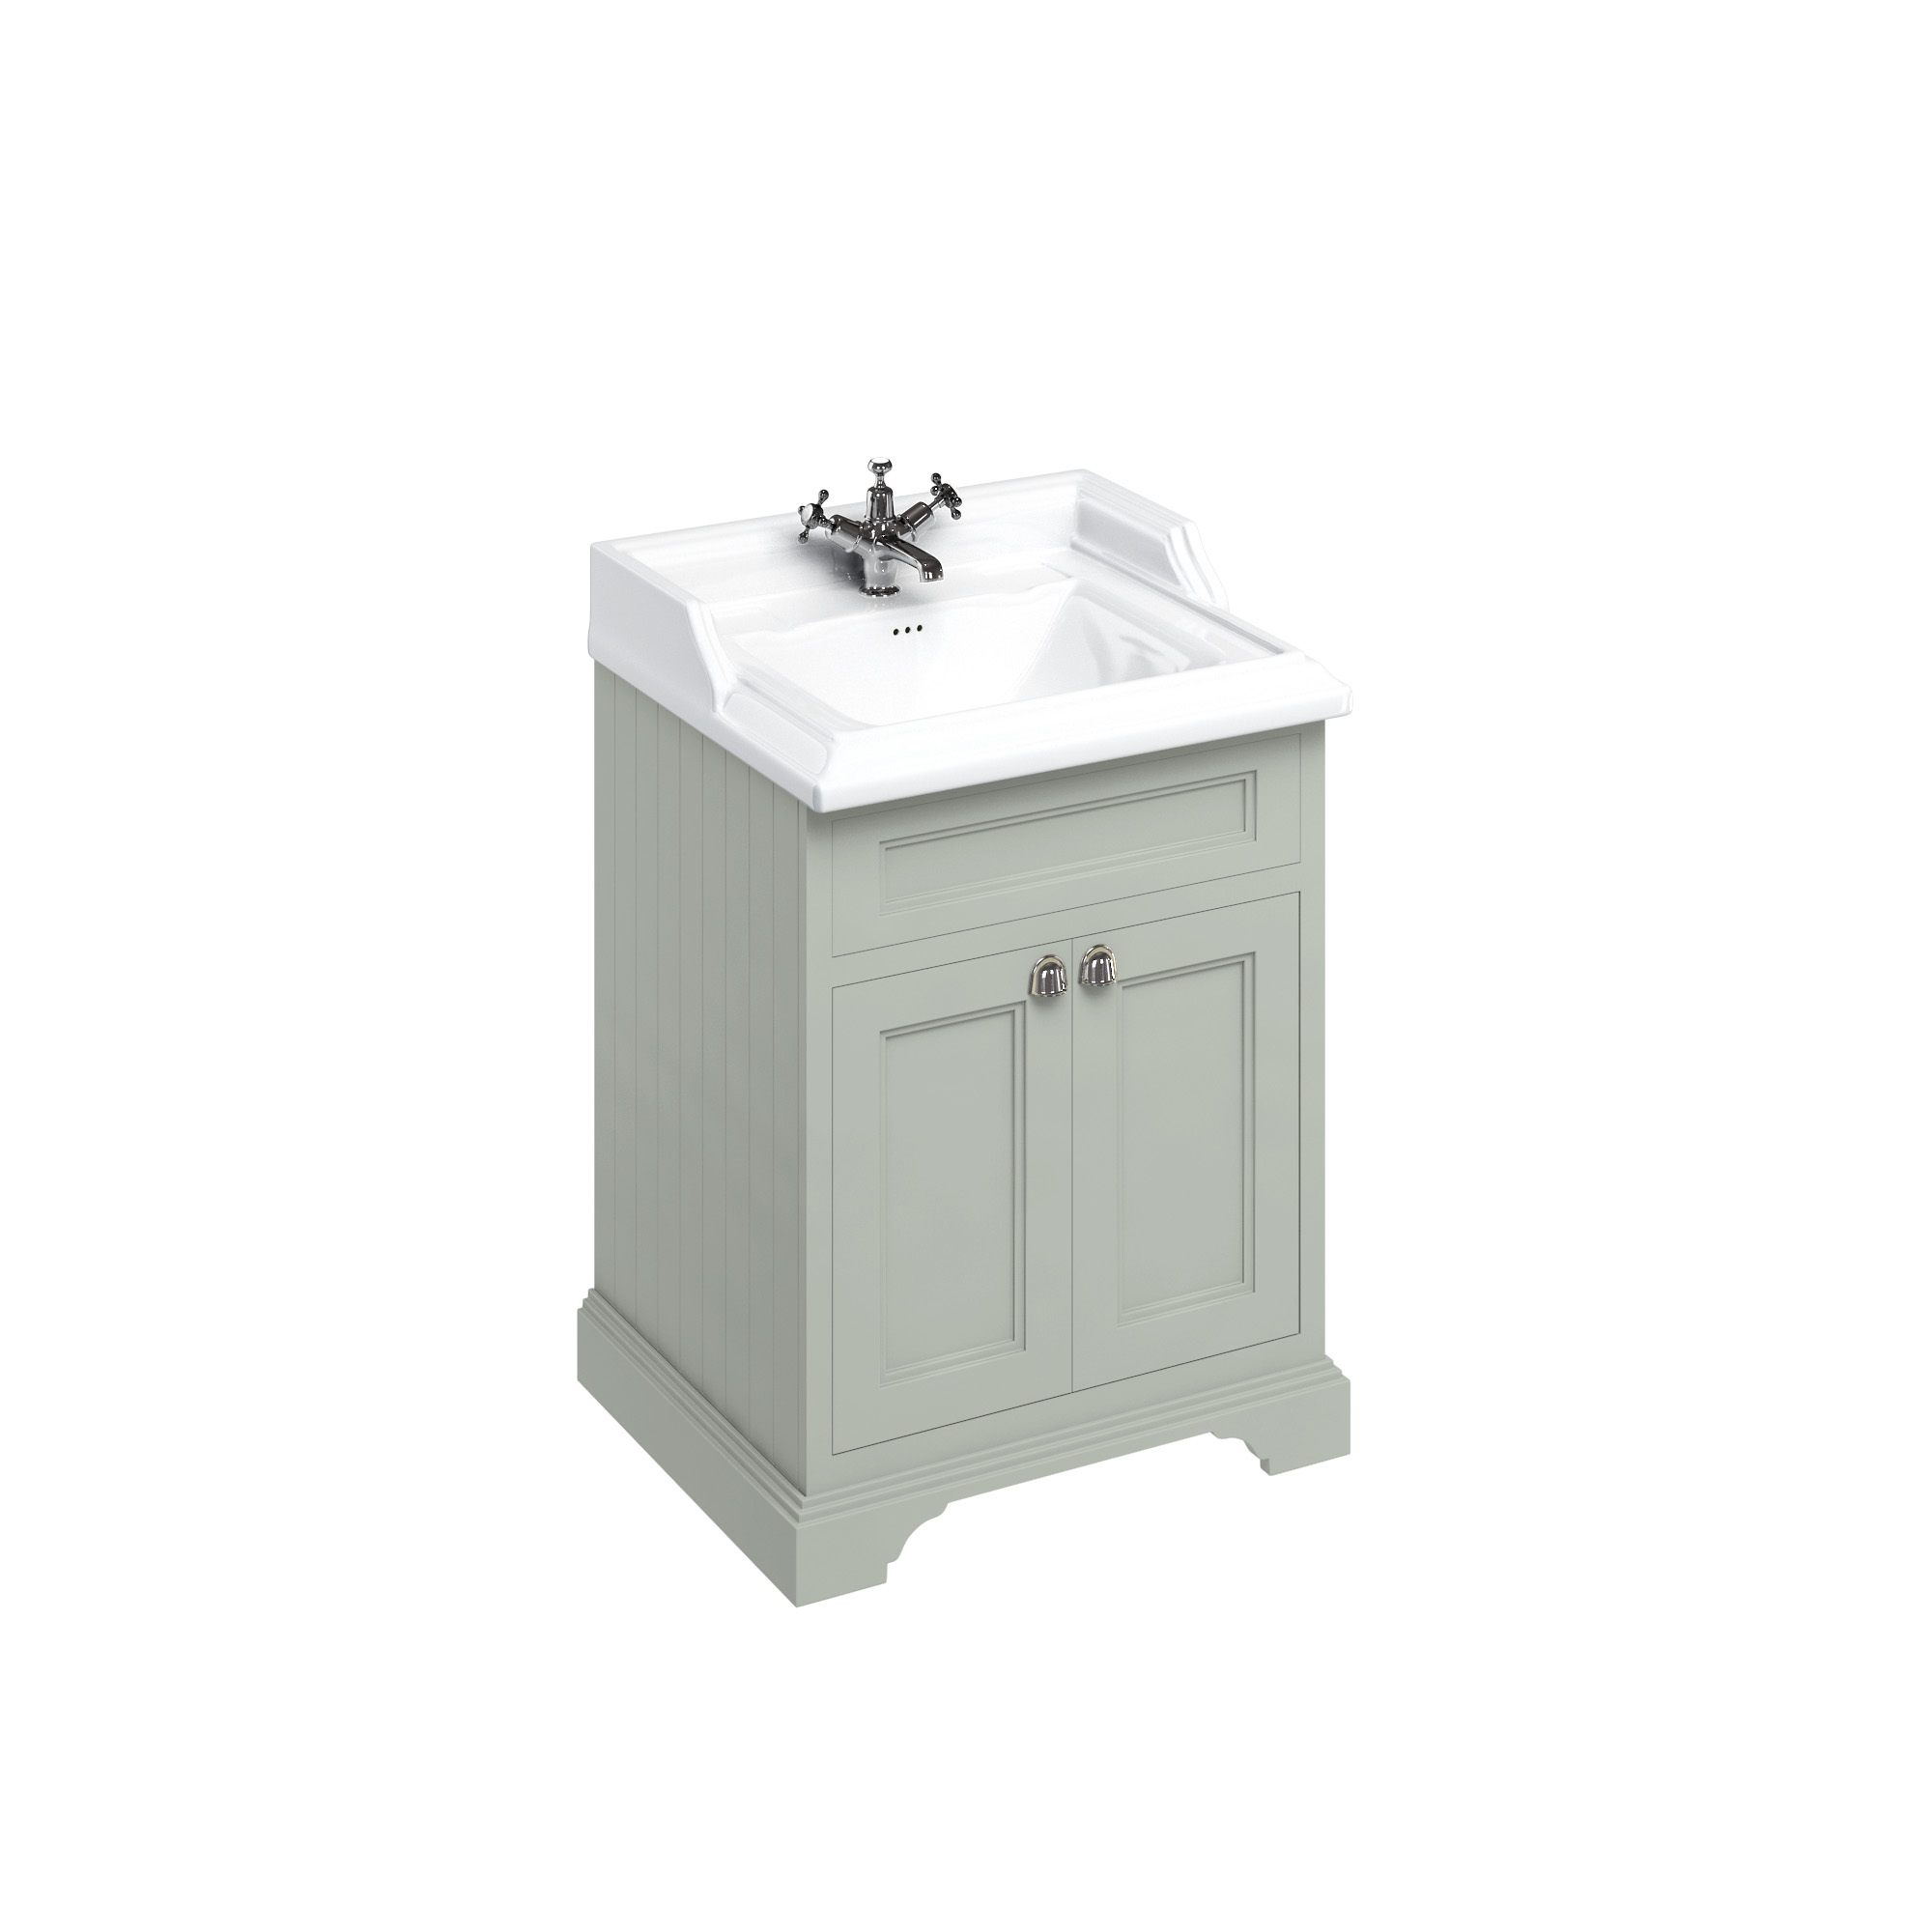 Freestanding 65 Vanity Unit with doors - Dark Olive and Classic basin 1 tap hole